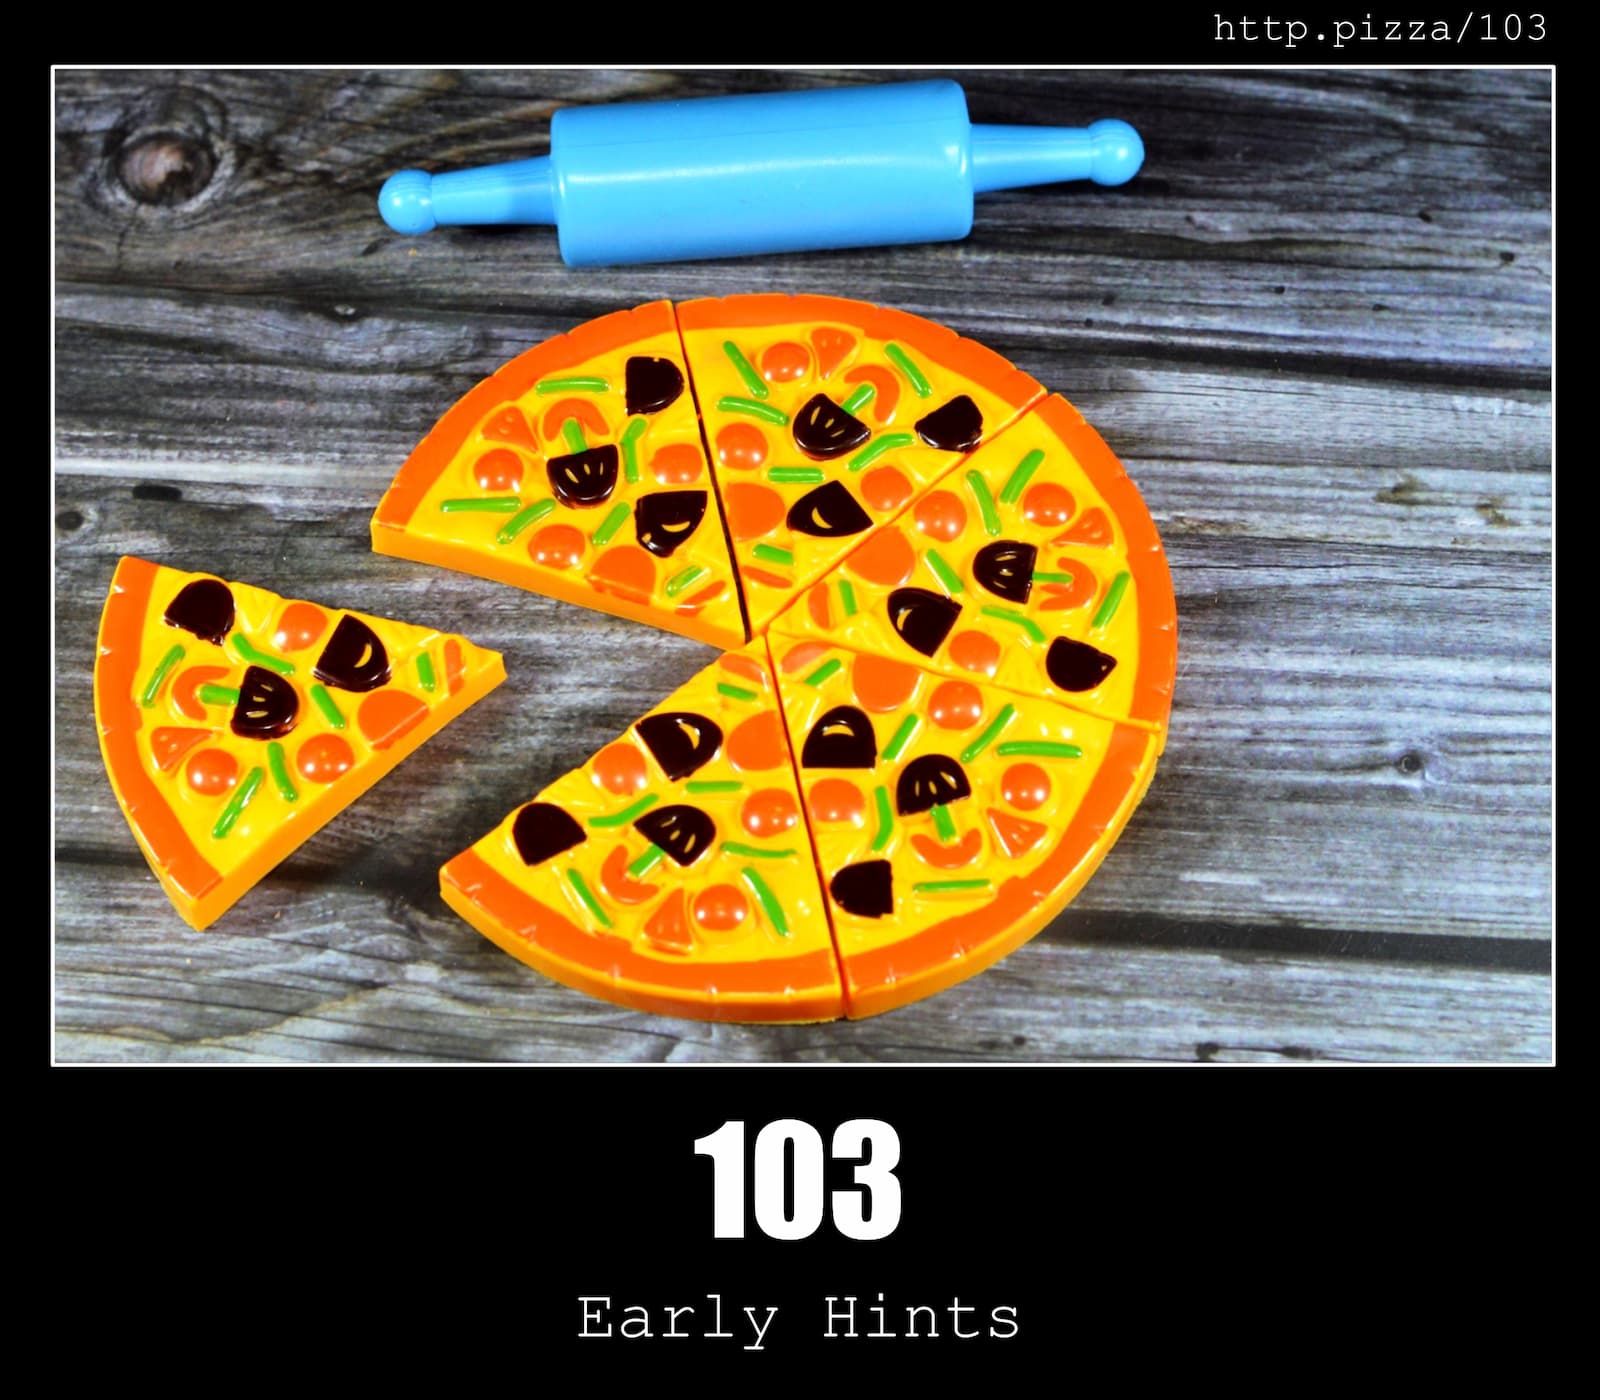 HTTP Status Code 103 Early Hints & Pizzas